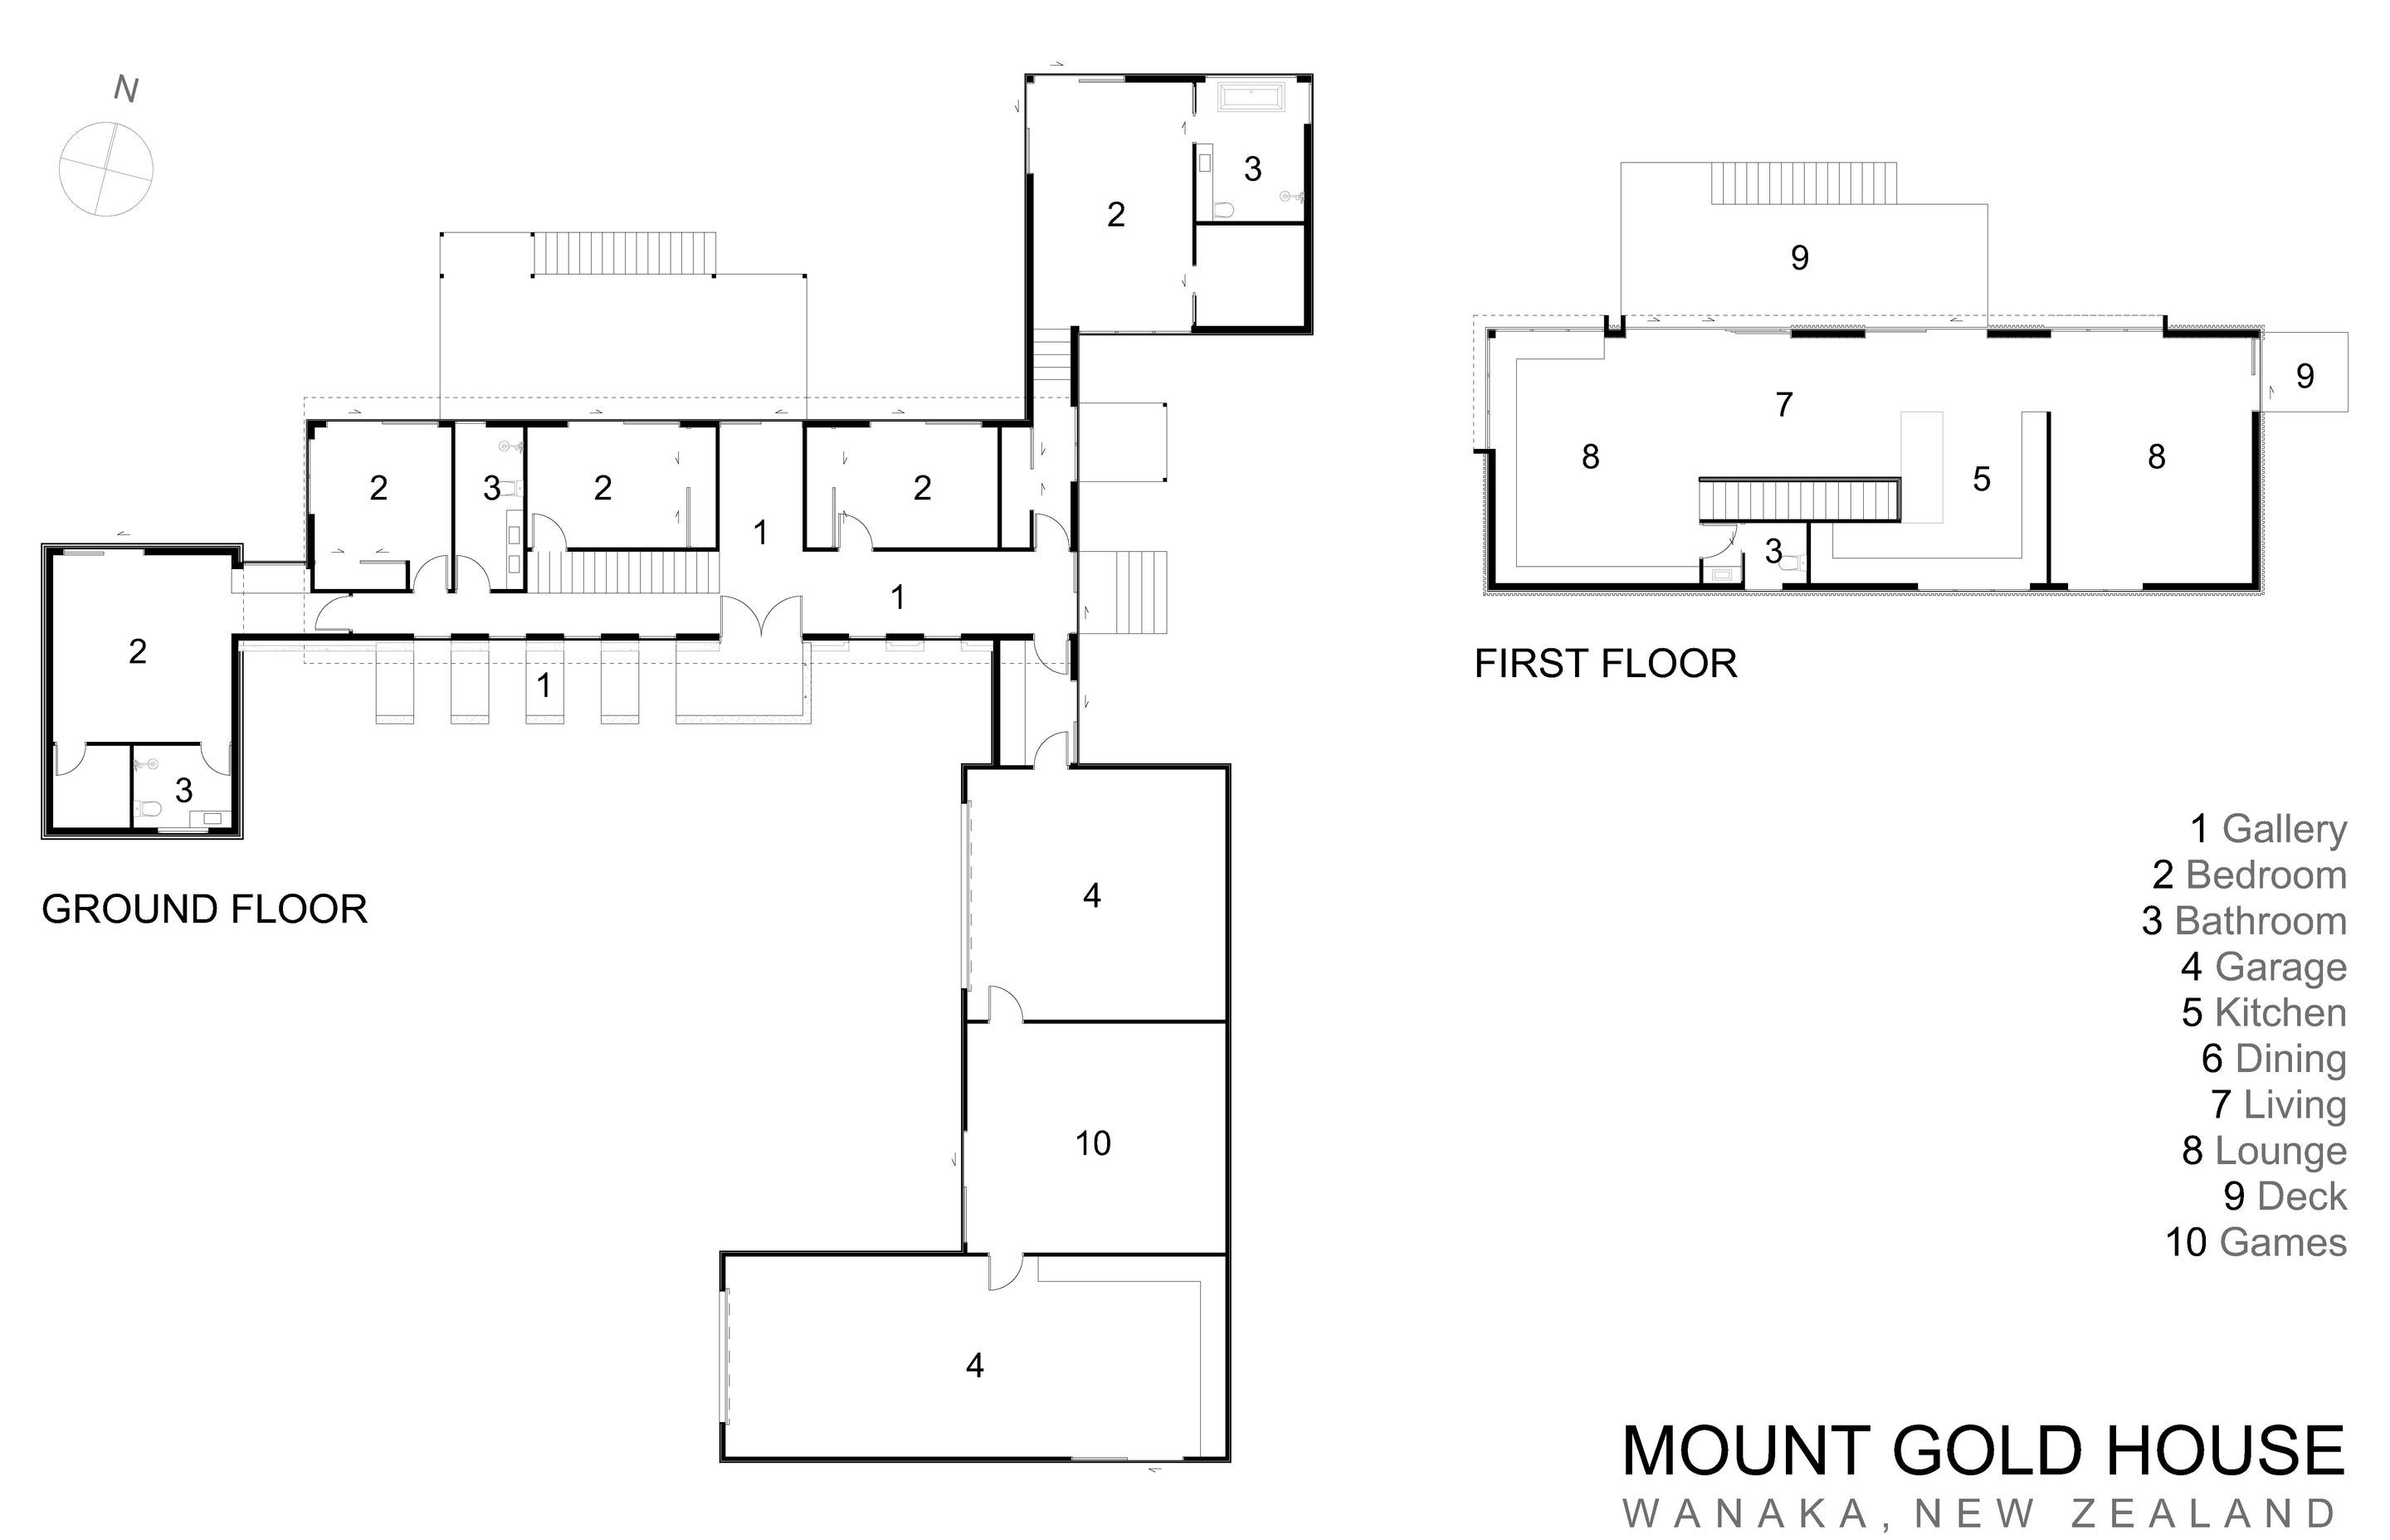 The ground-floor and first-floor plans of Mount Gold House by AO Architecture.